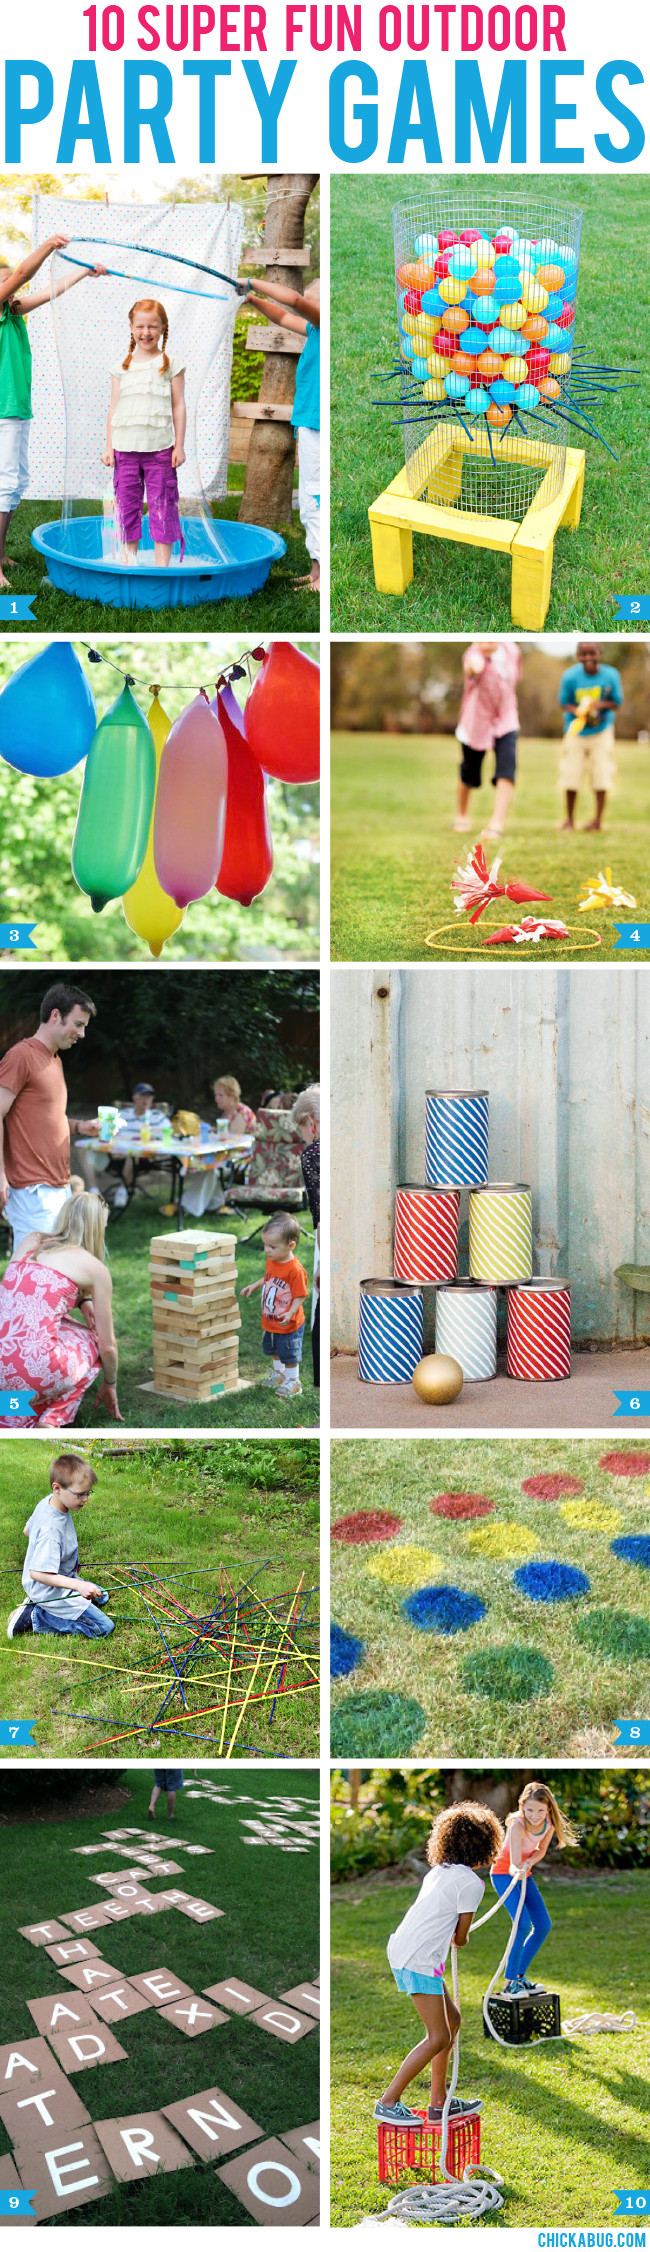 Summer Party Theme Ideas For Adults
 10 super fun outdoor party games